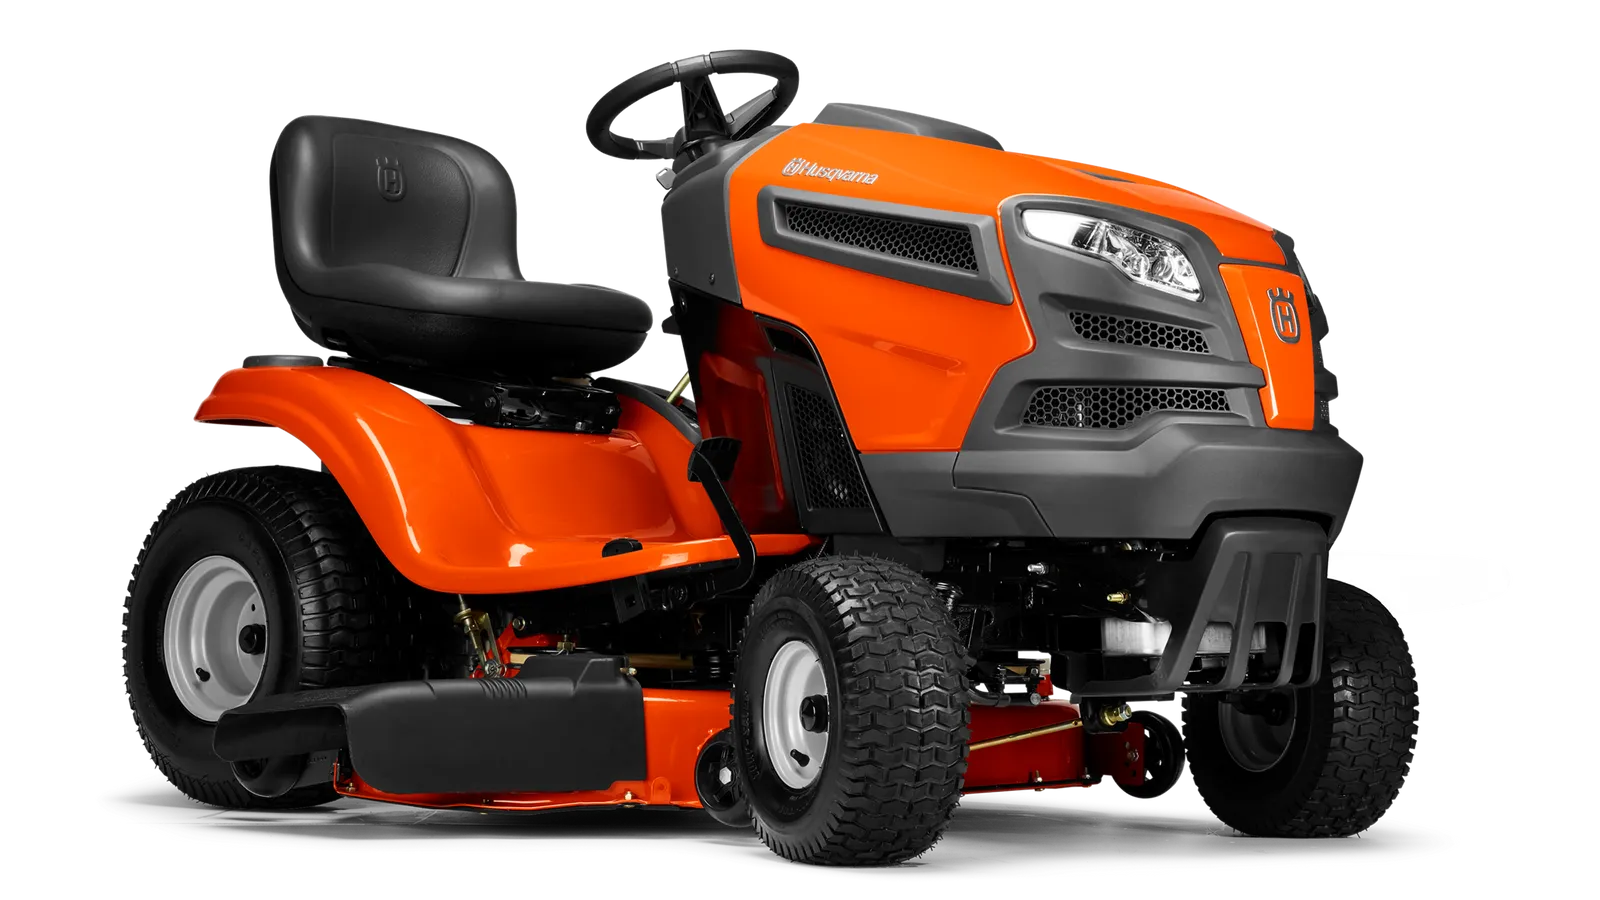 How To Replace Starter On Husqvarna Riding Mower